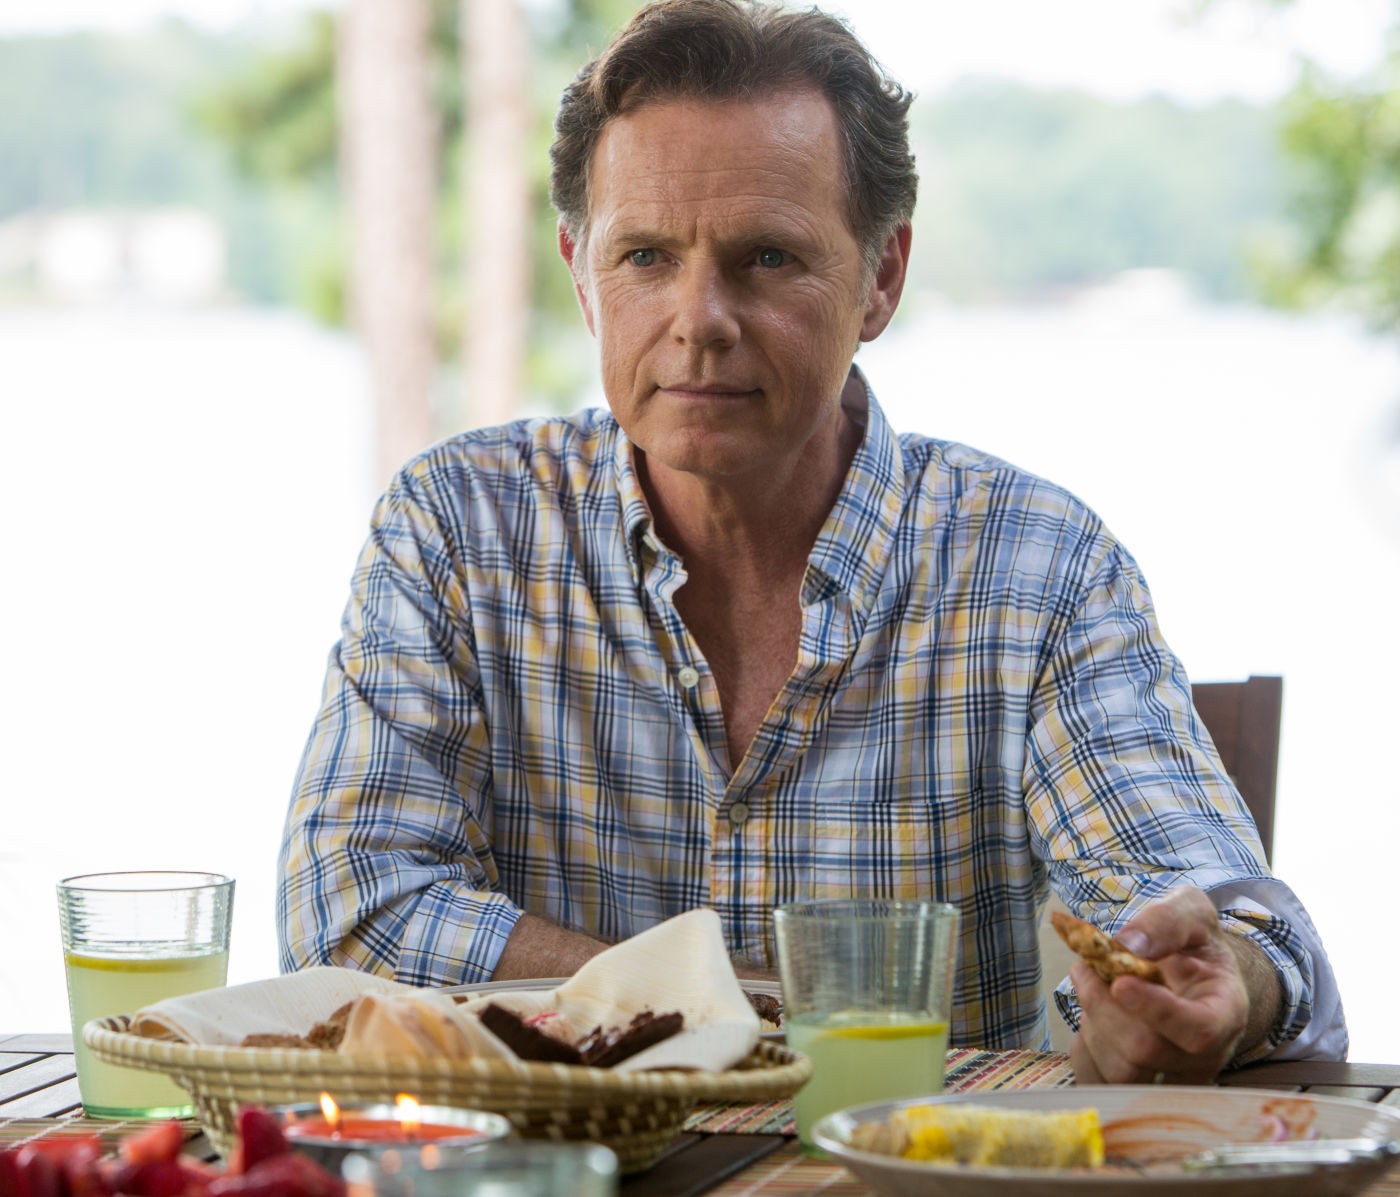 Bruce Greenwood stars as Hugh Butterfield in Universal Pictures' Endless Love (2014)